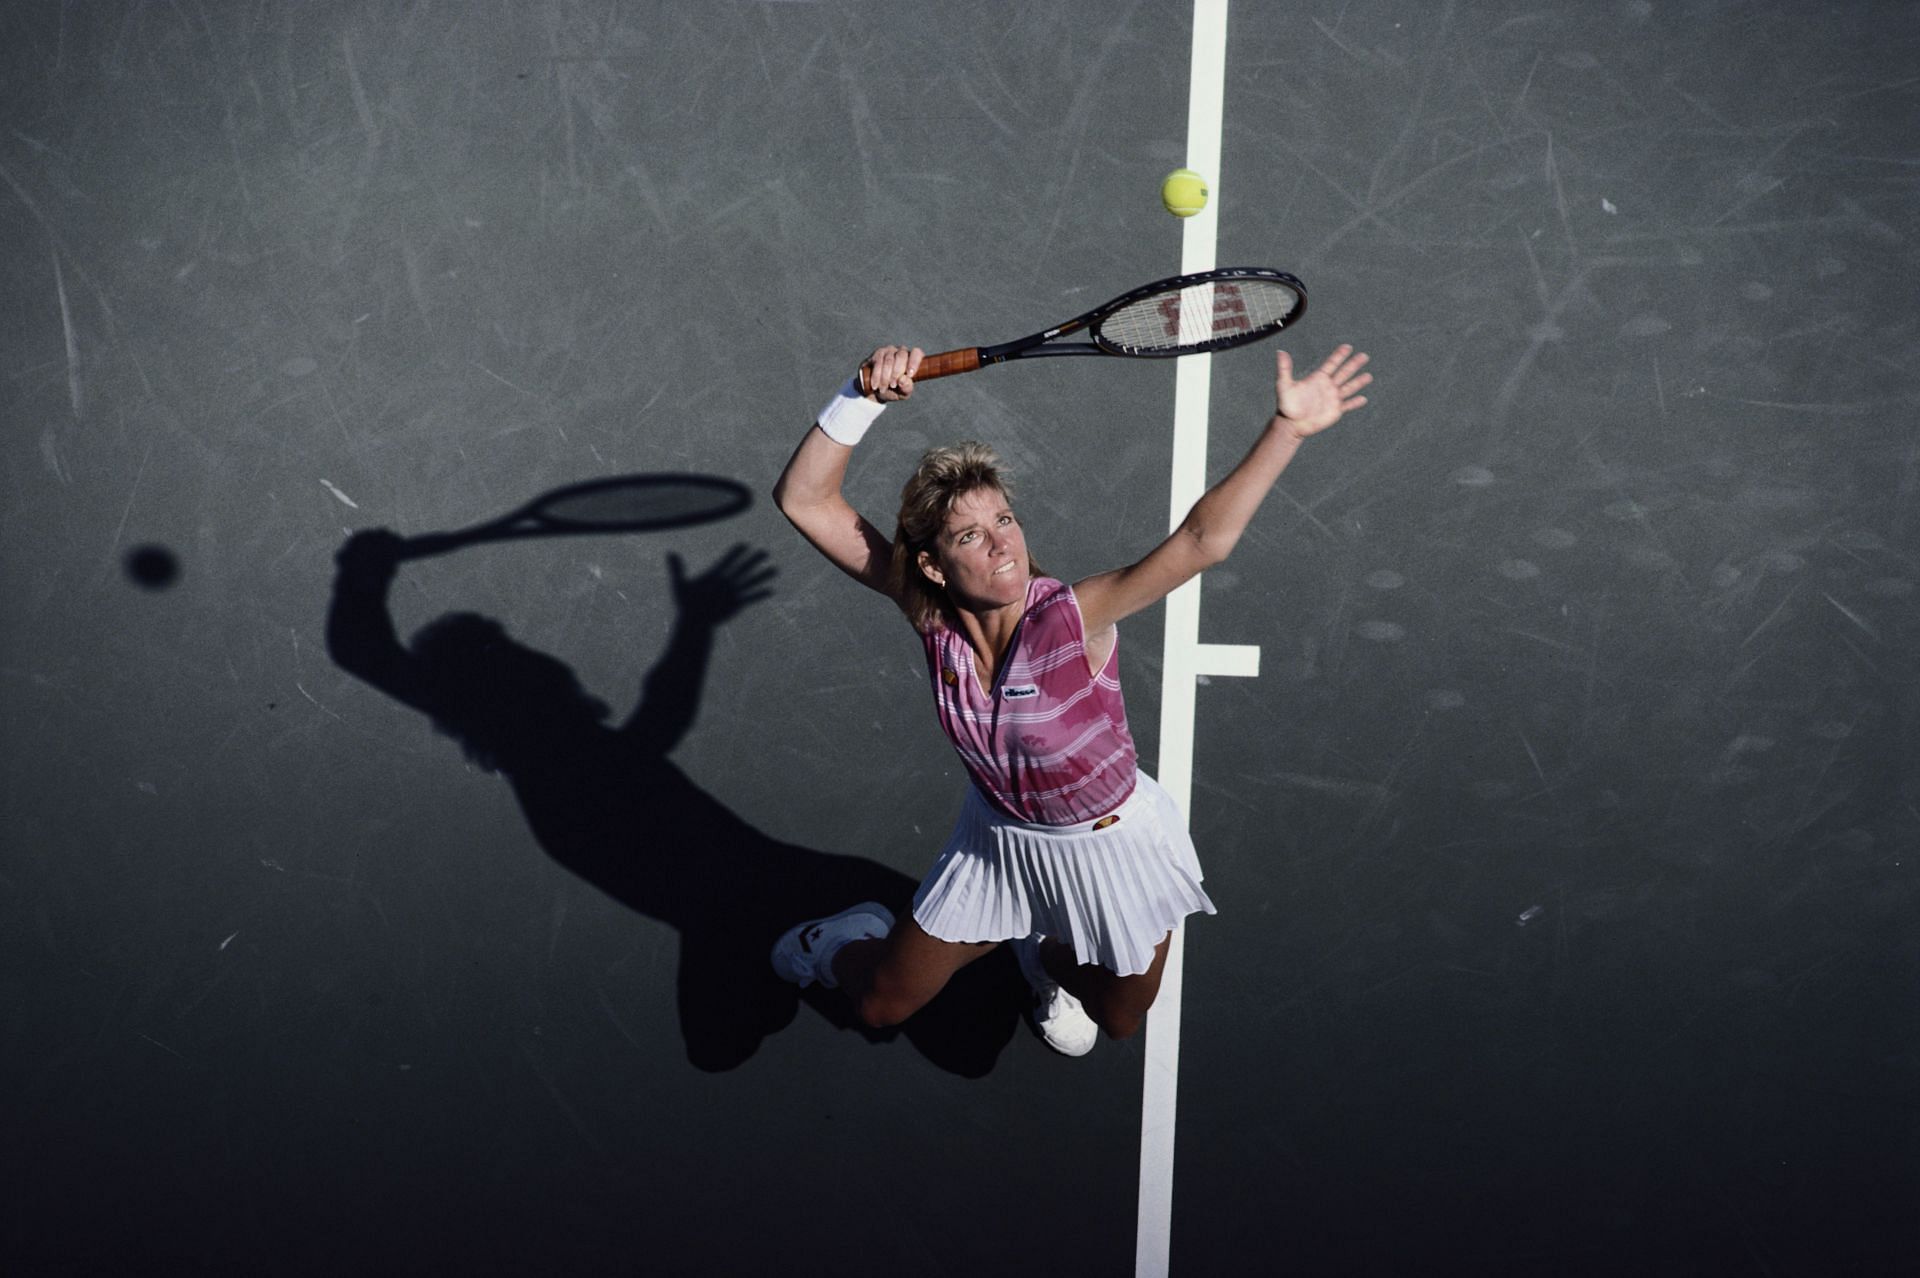 Chris Evert had lifted the Berlin title in 1985.